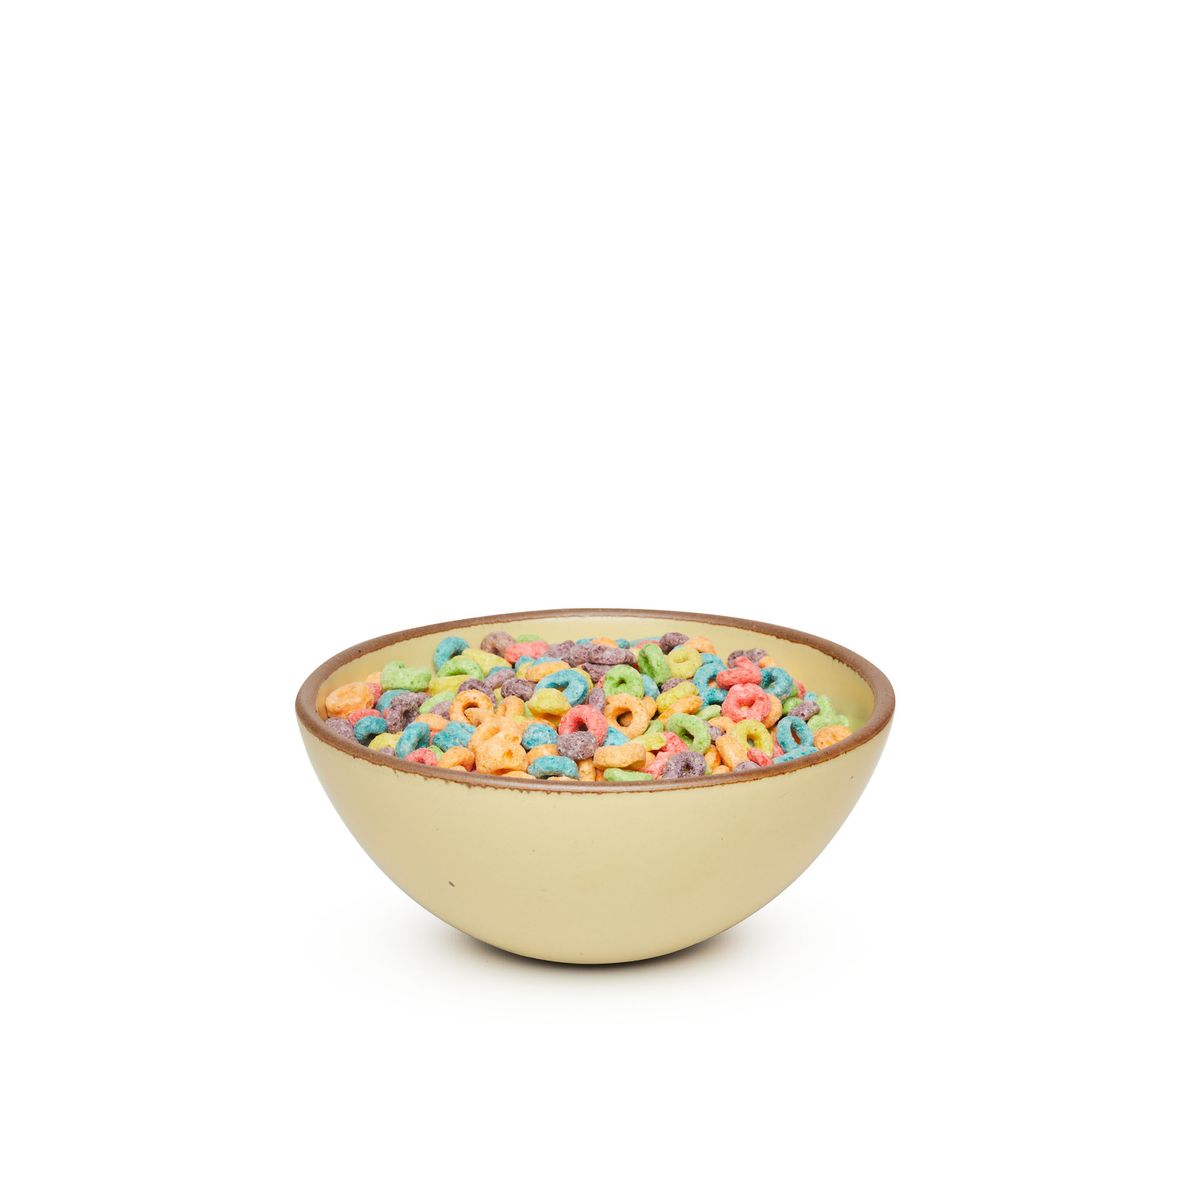 A medium rounded ceramic bowl in a light butter yellow color featuring iron speckles and an unglazed rim, filled with cereal